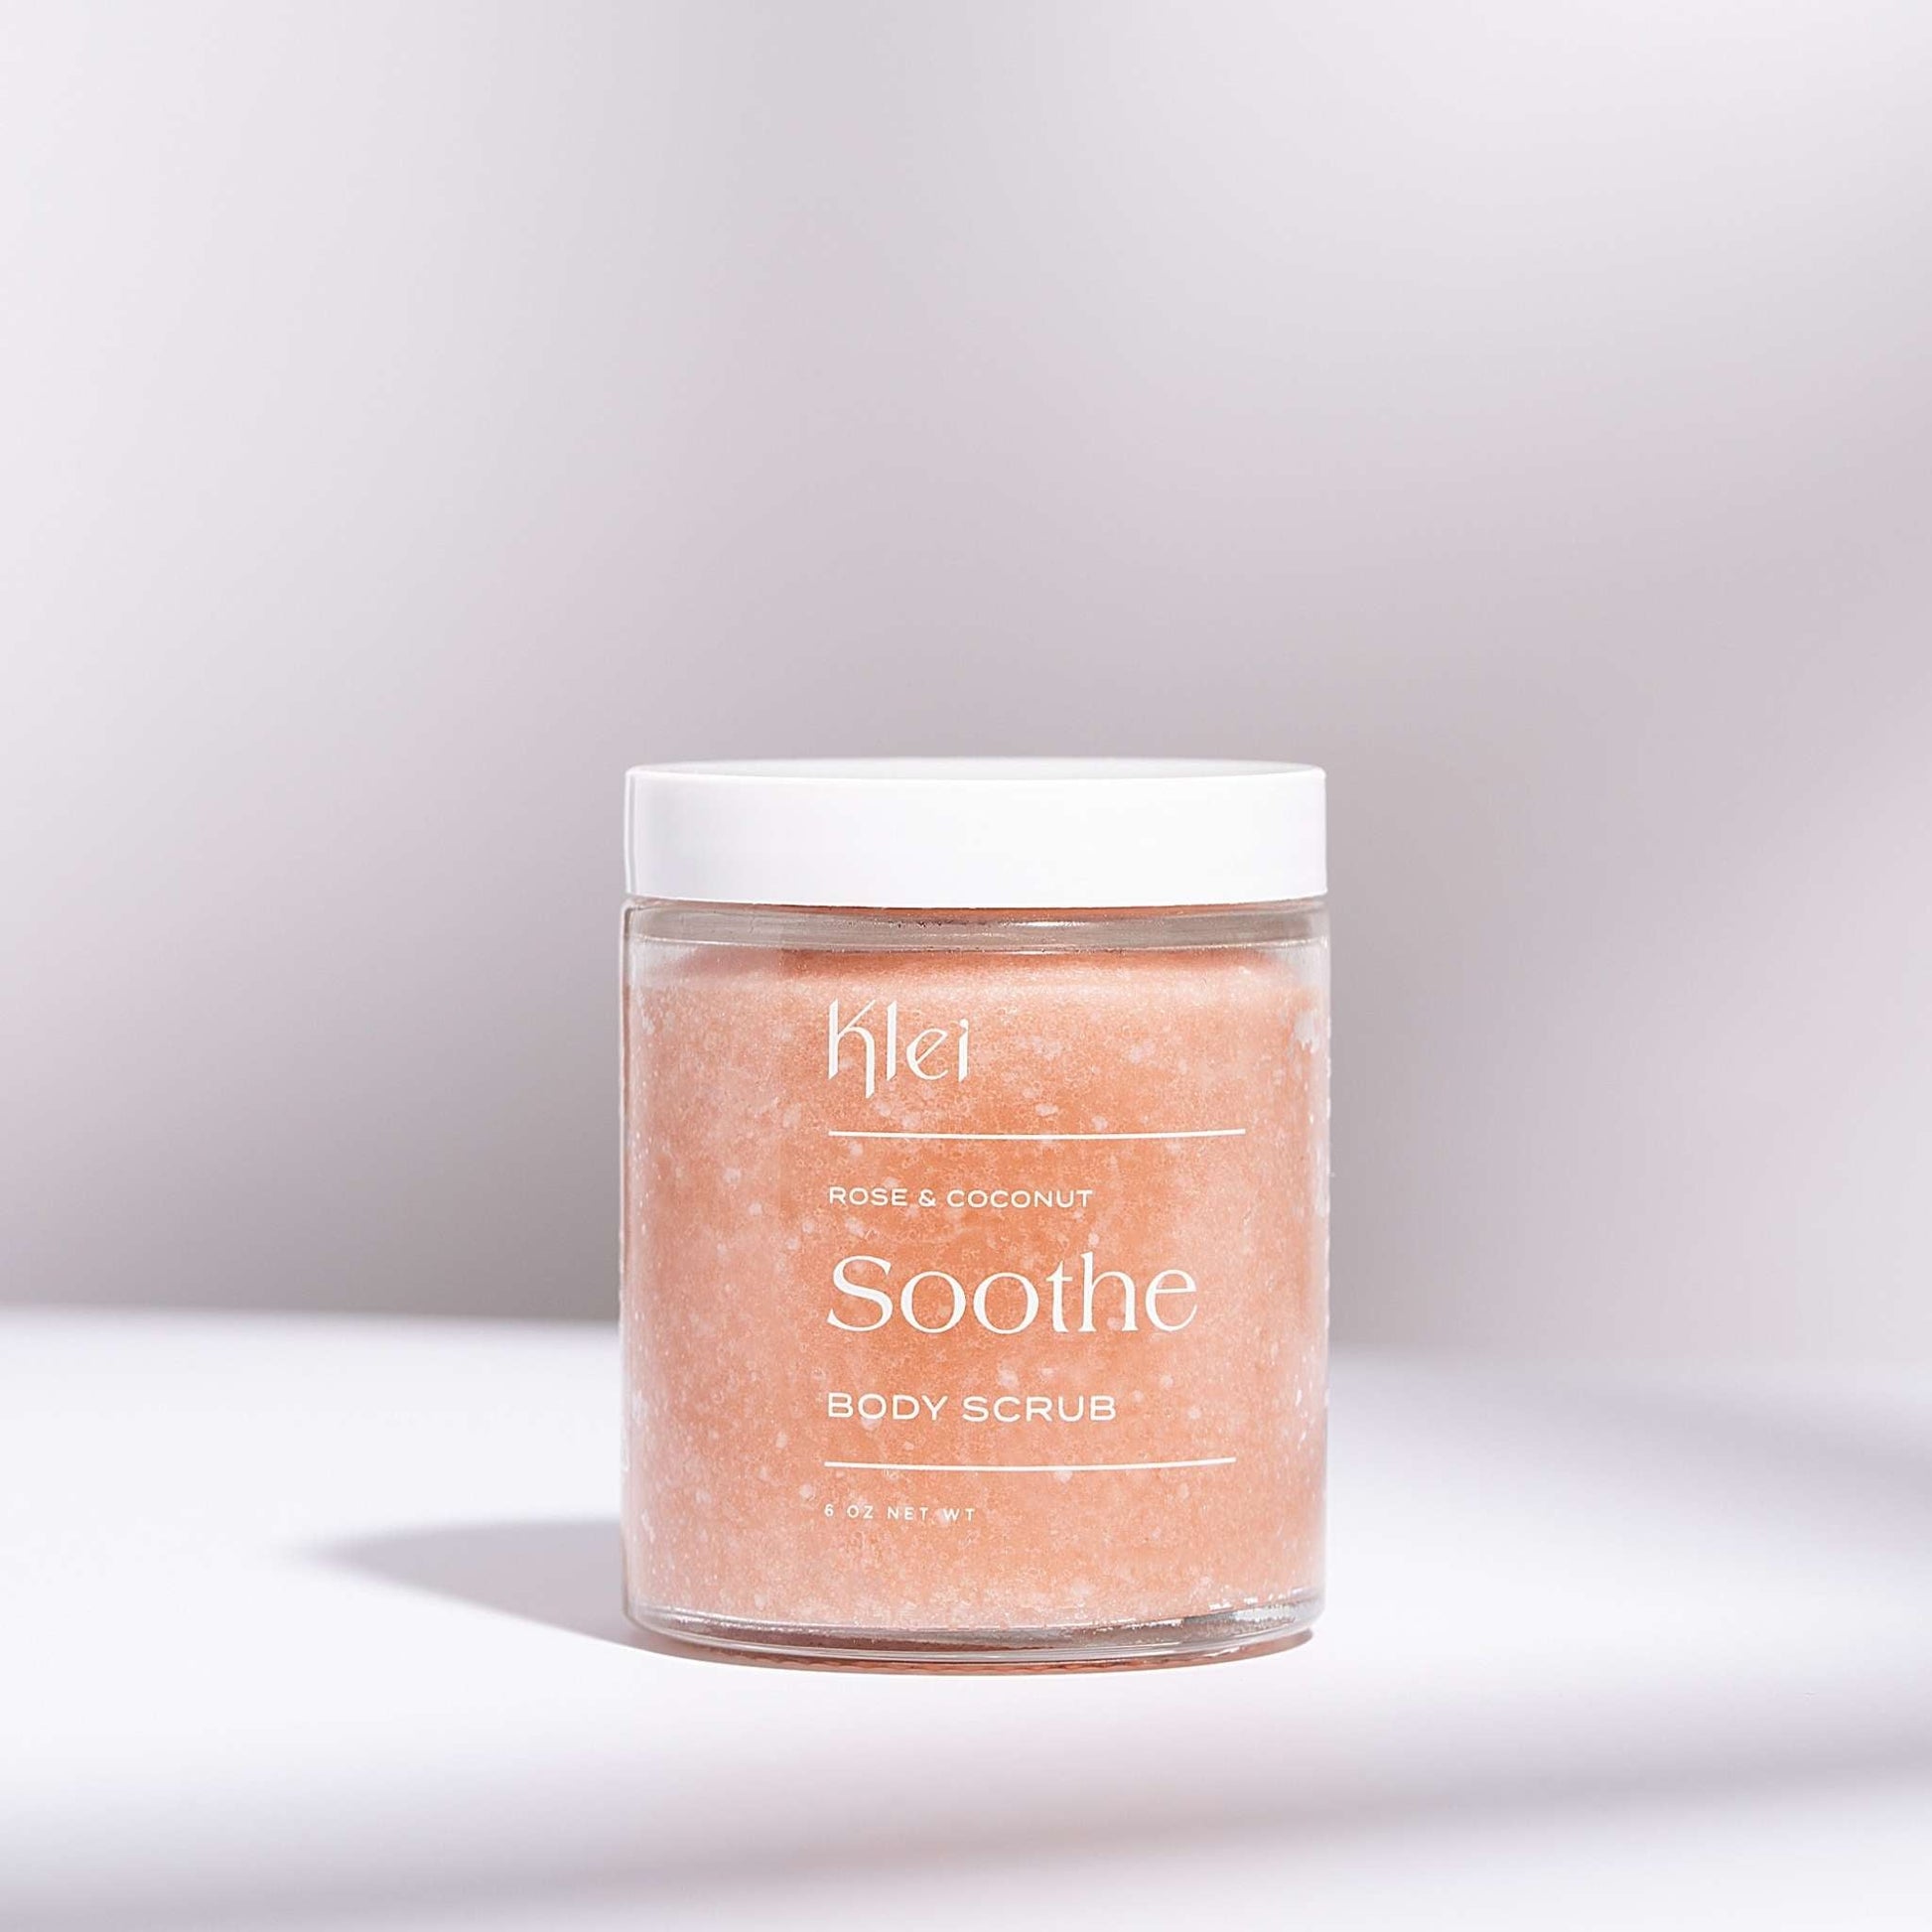 Klei Soothe Rose & Coconut Body Scrub